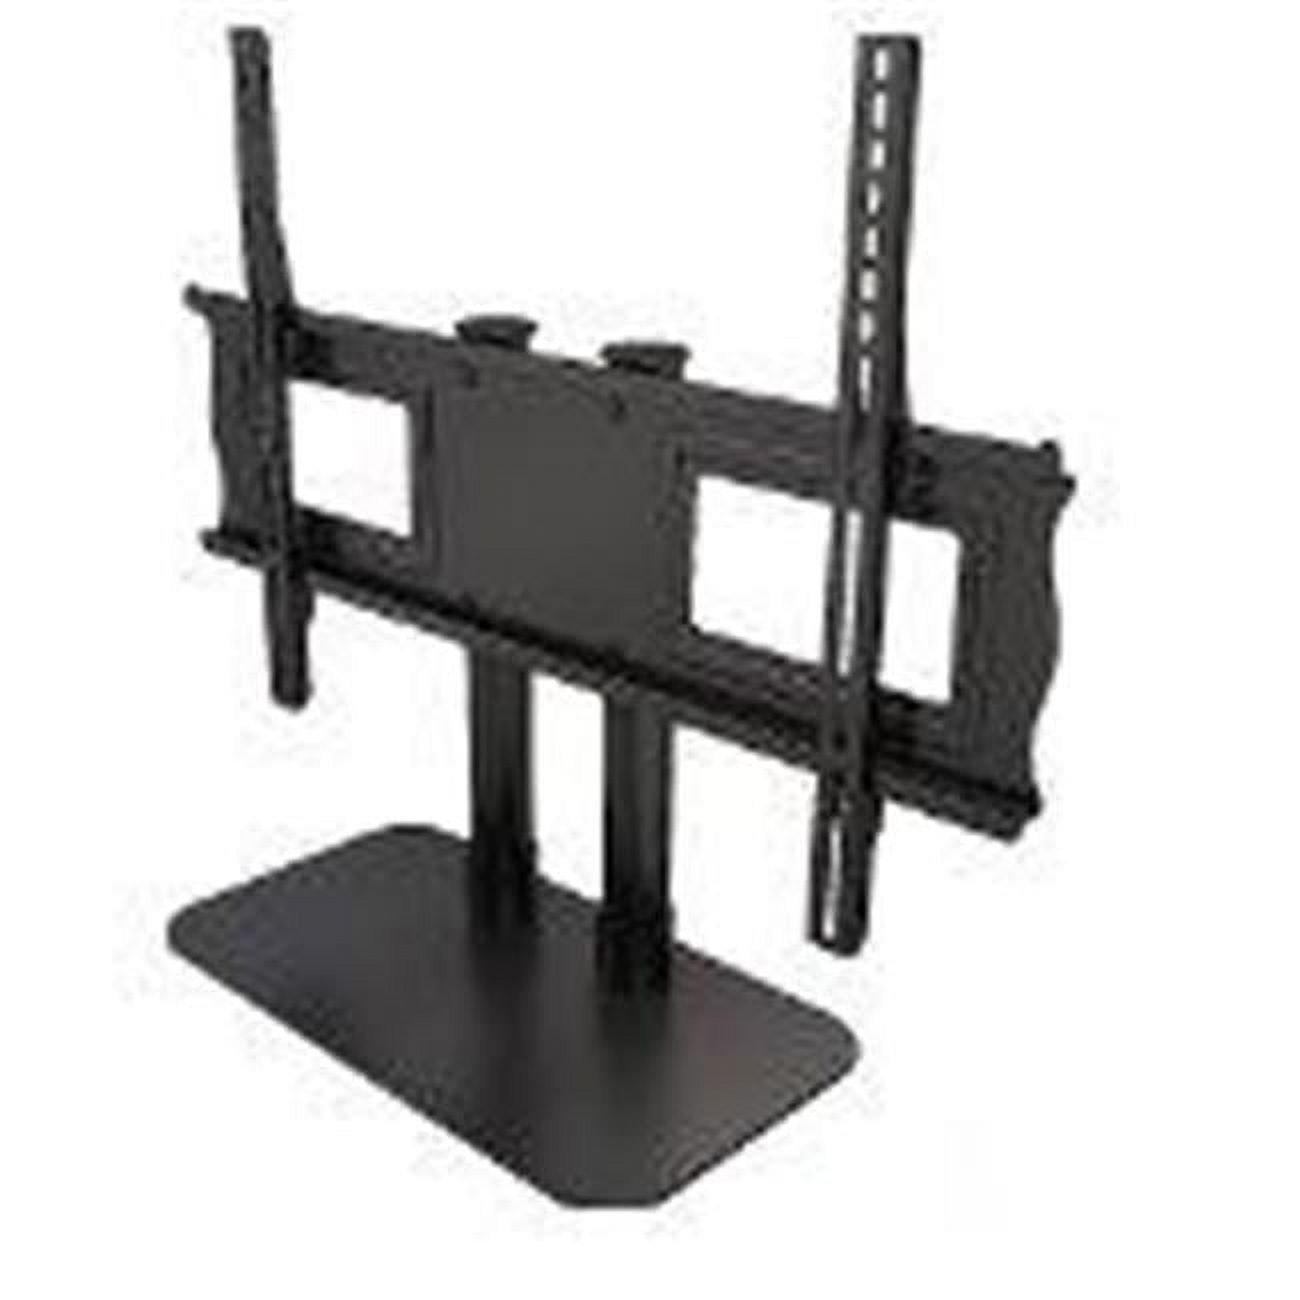 Single Desktop Stand For 32 In. to 55 In. Flat Panel Screens - image 1 of 1